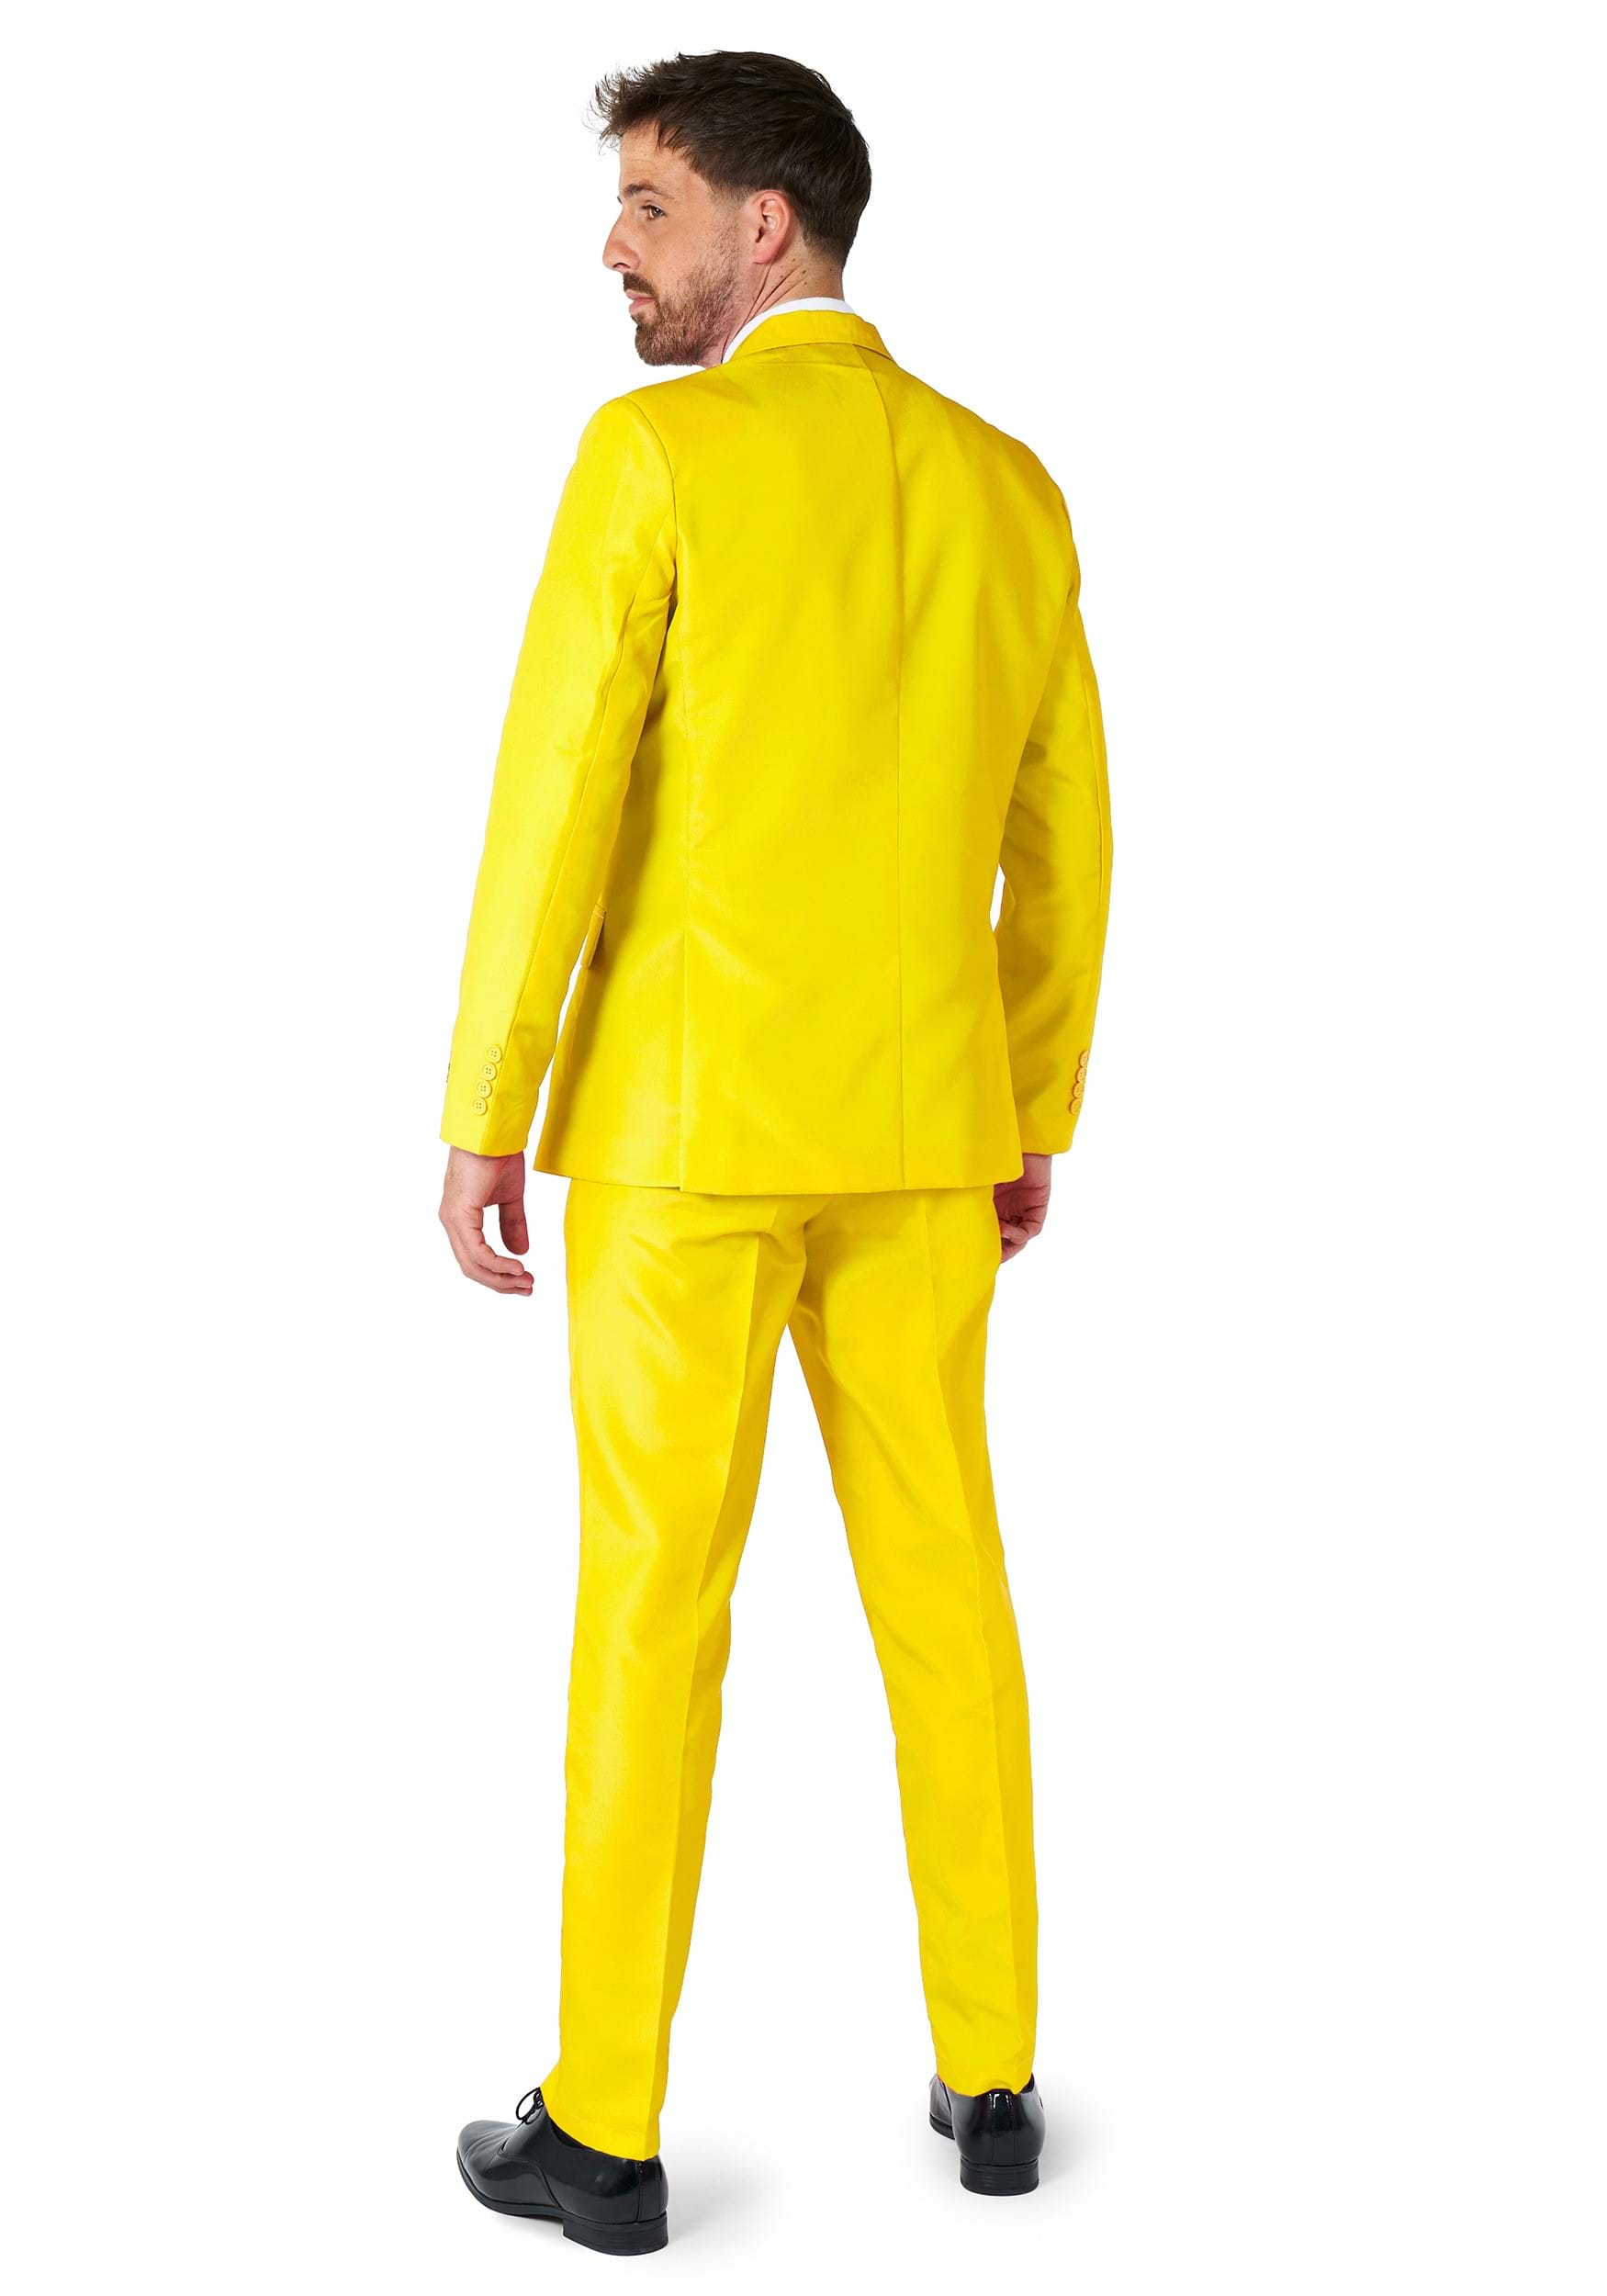 Suitmeister Solid Yellow Mens Suit